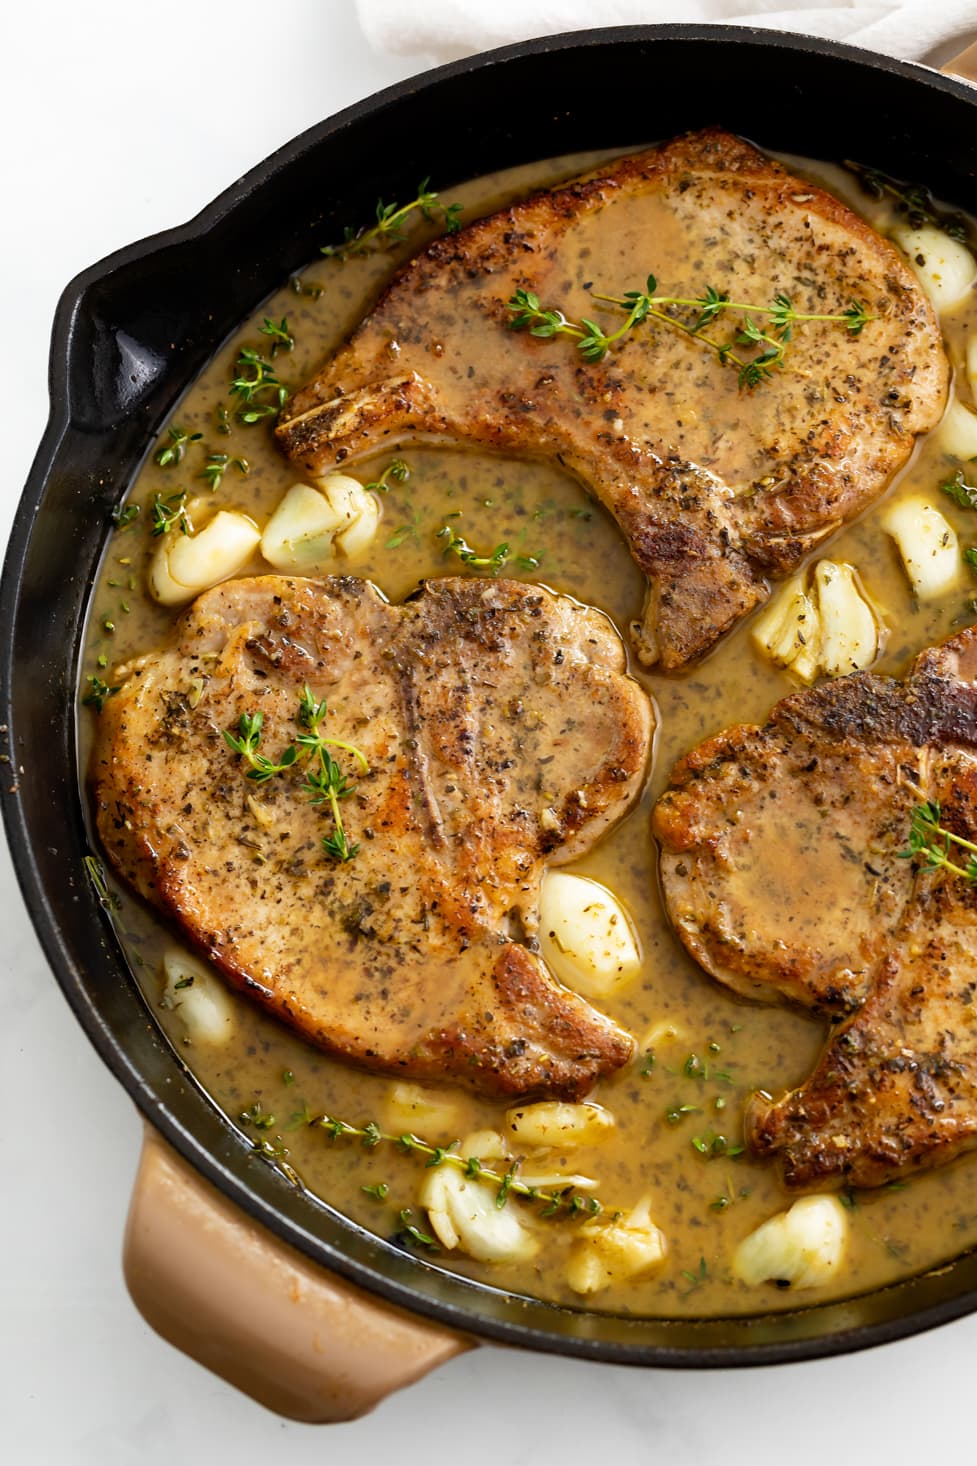 Pan Fried Pork Chops in a skillet with a pan sauce, garlic, and thyme.